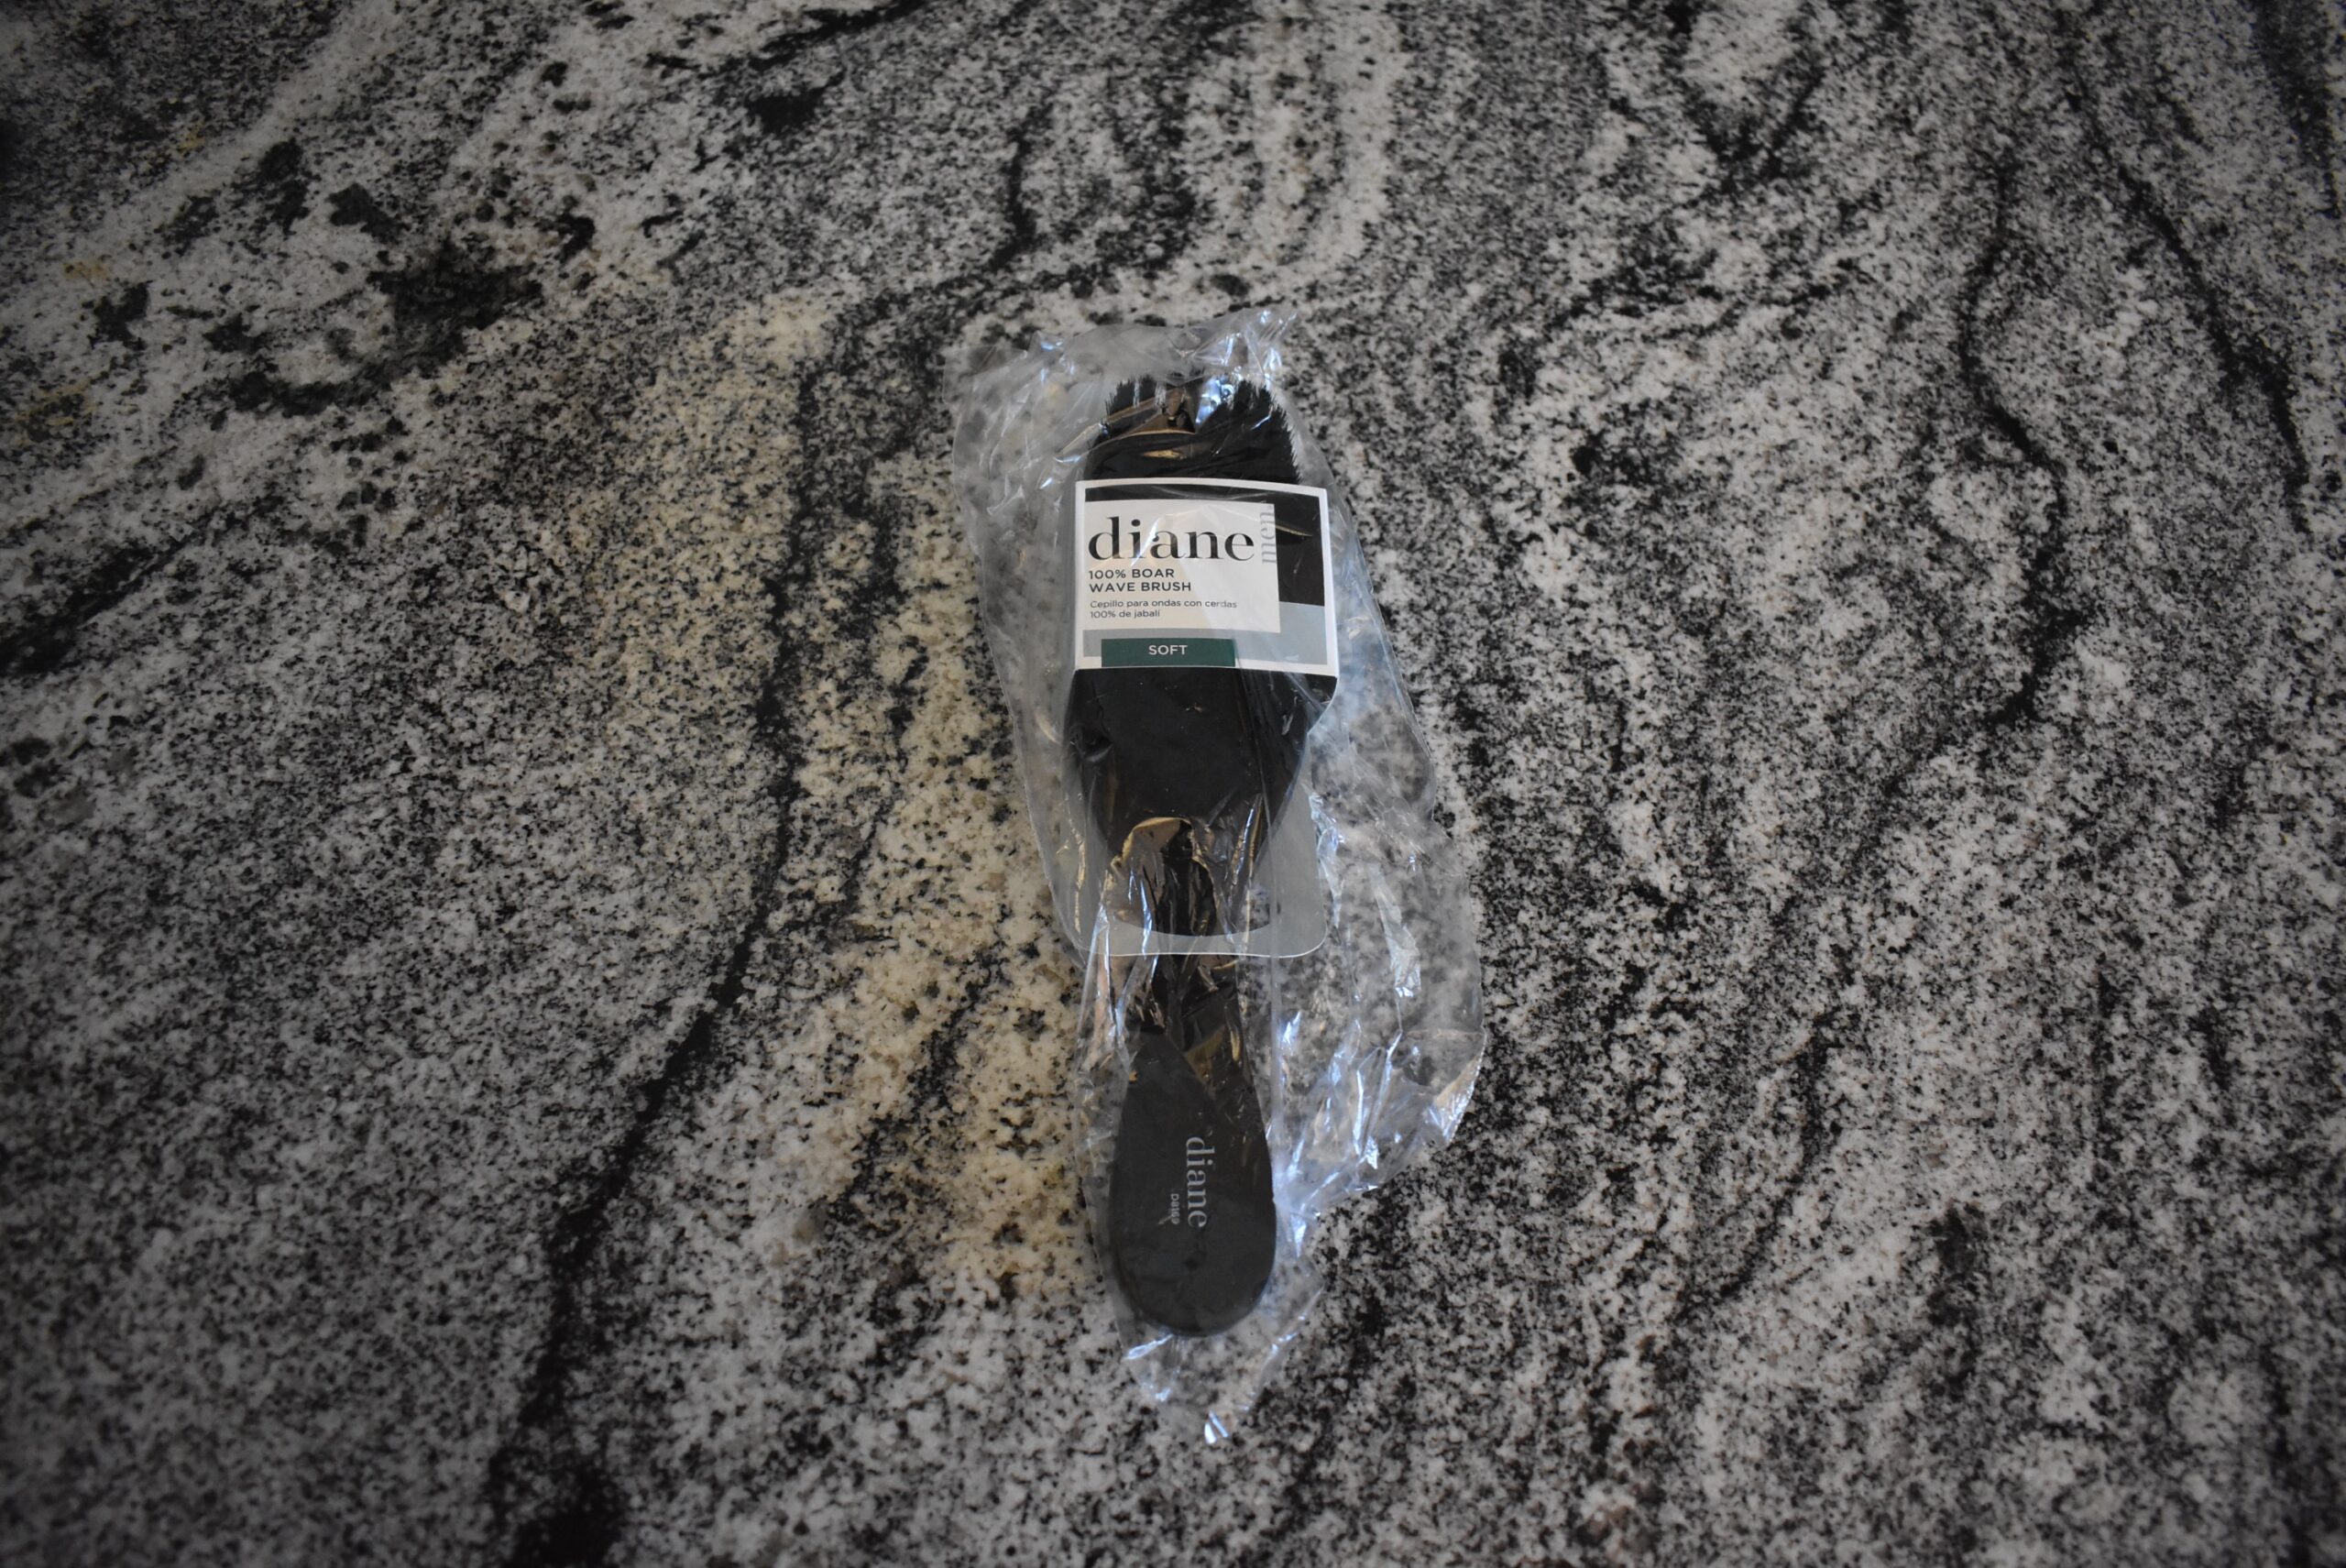 The diane boar bristle hair brush on a counter in its plastic protective sleeve